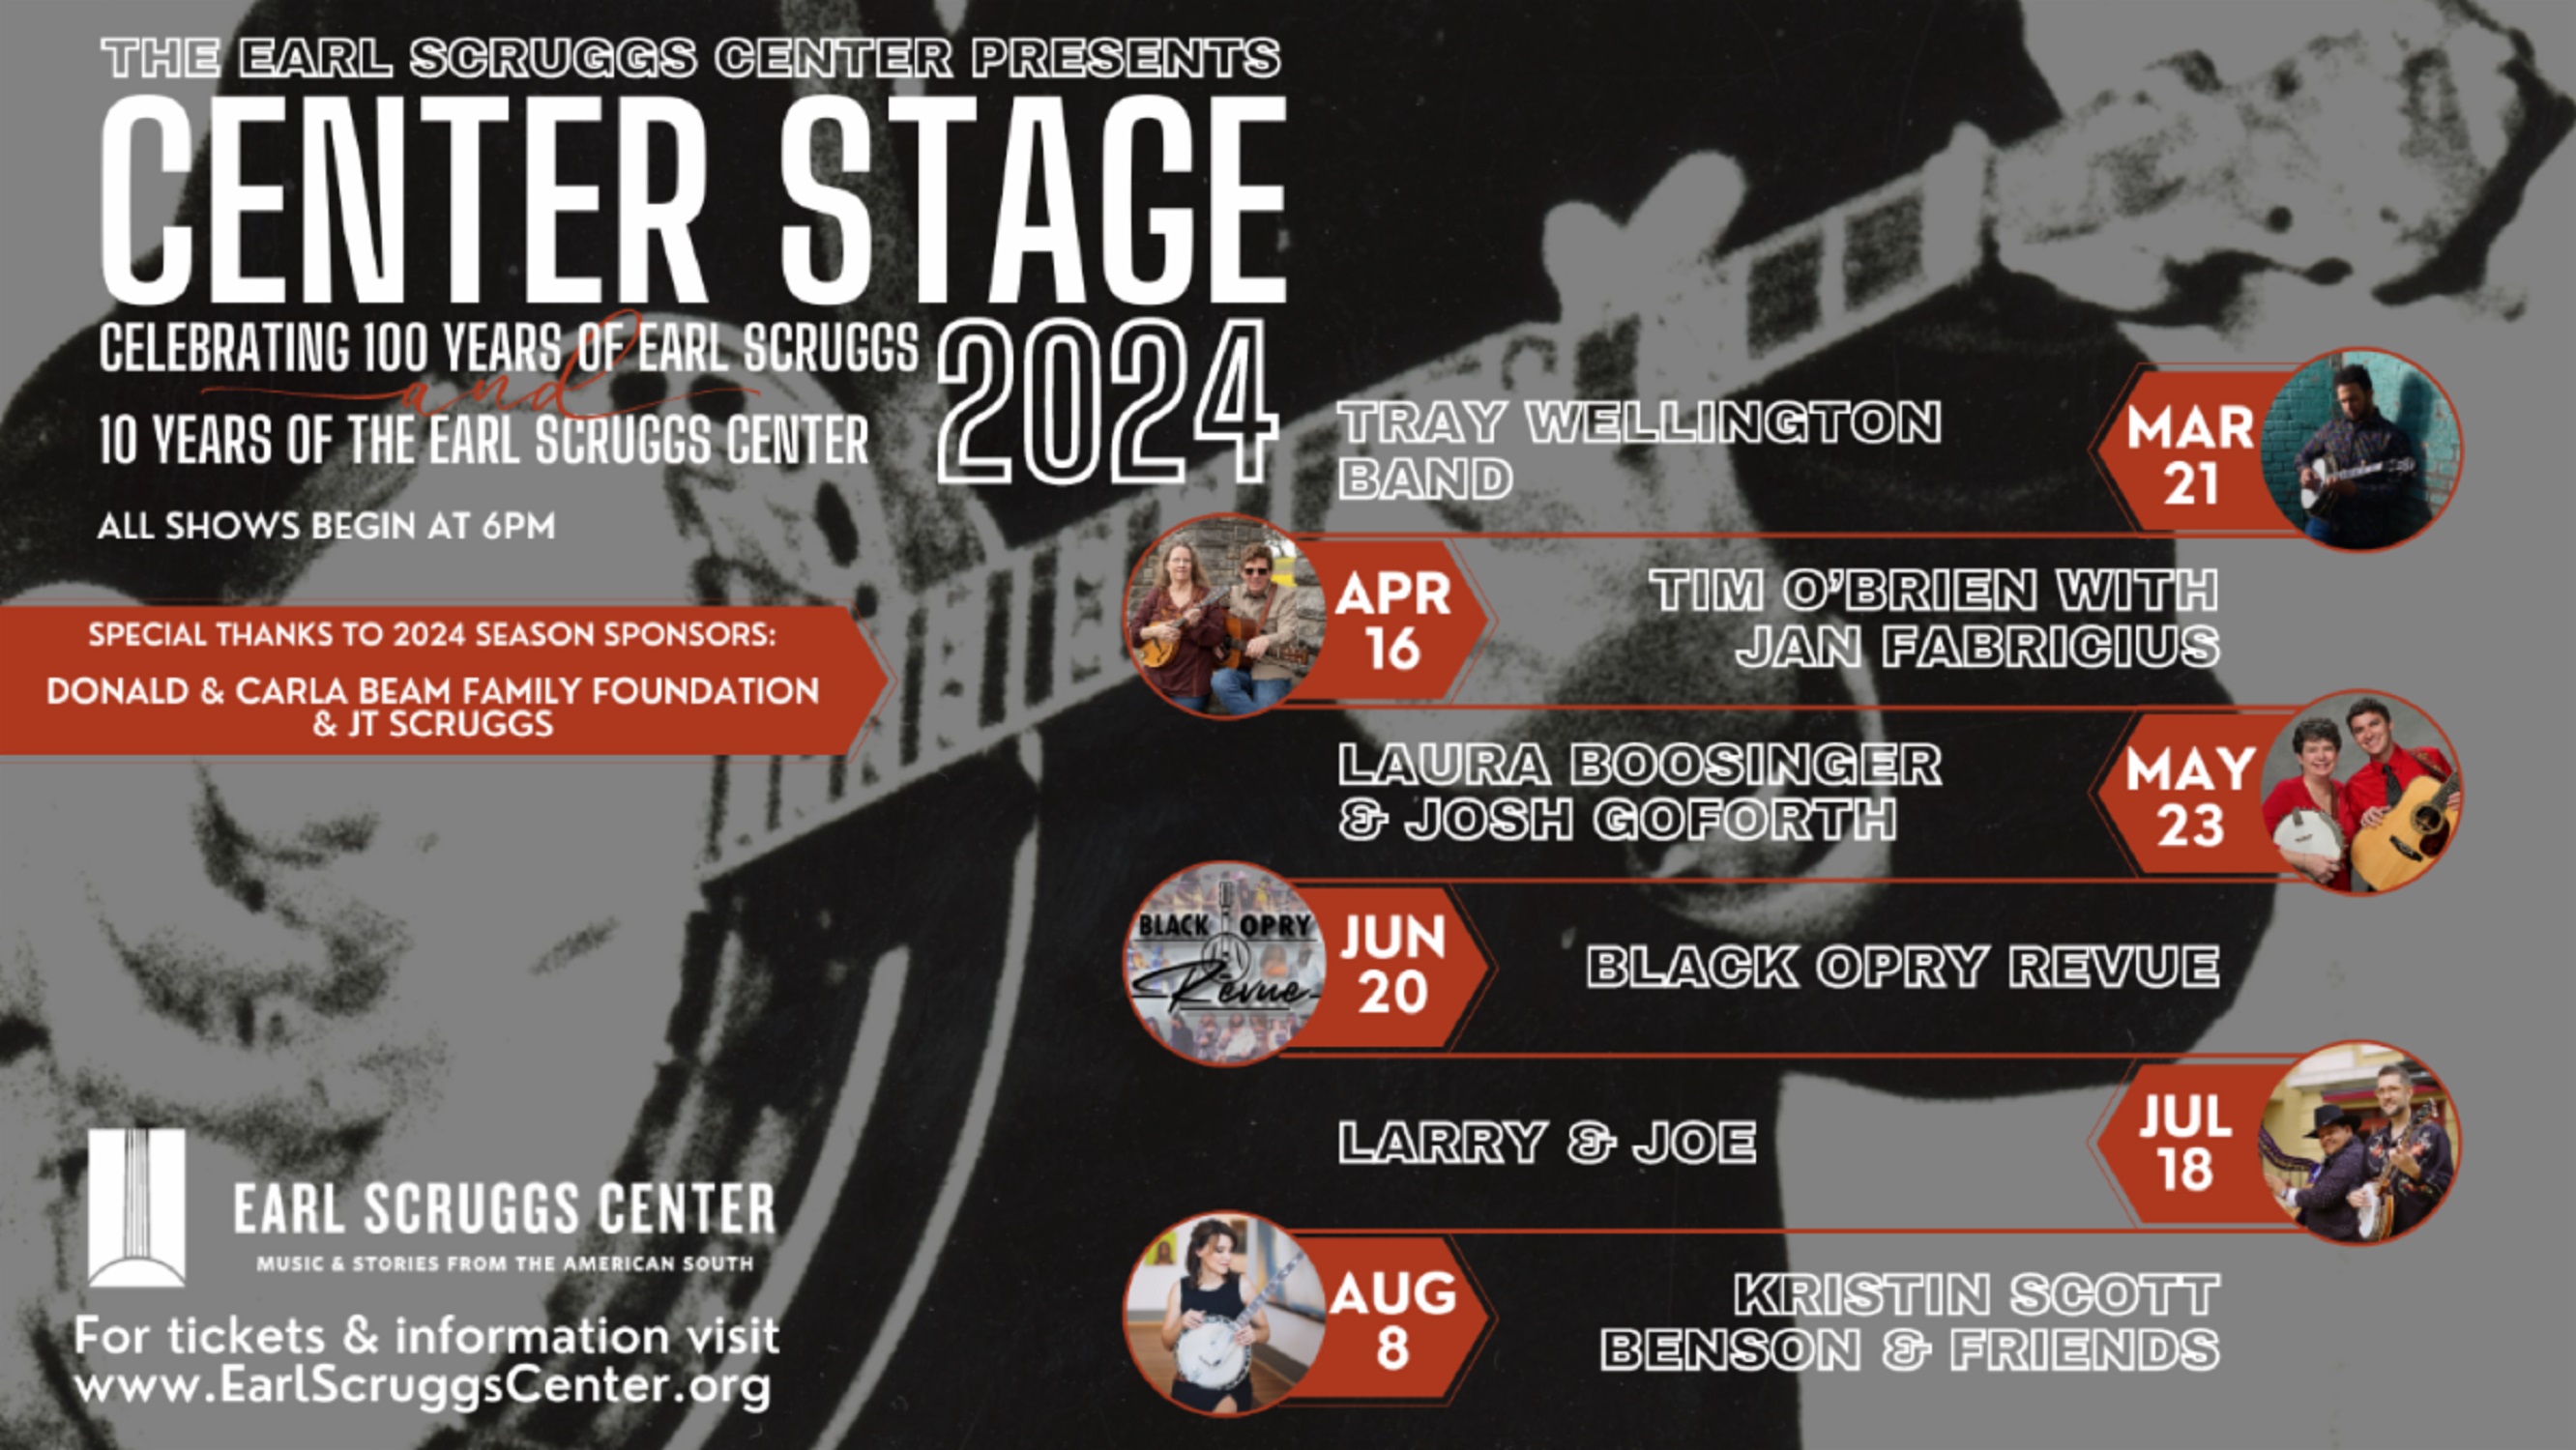 CENTER STAGE CONCERT SERIES Returns to EARL SCRUGGS CENTER